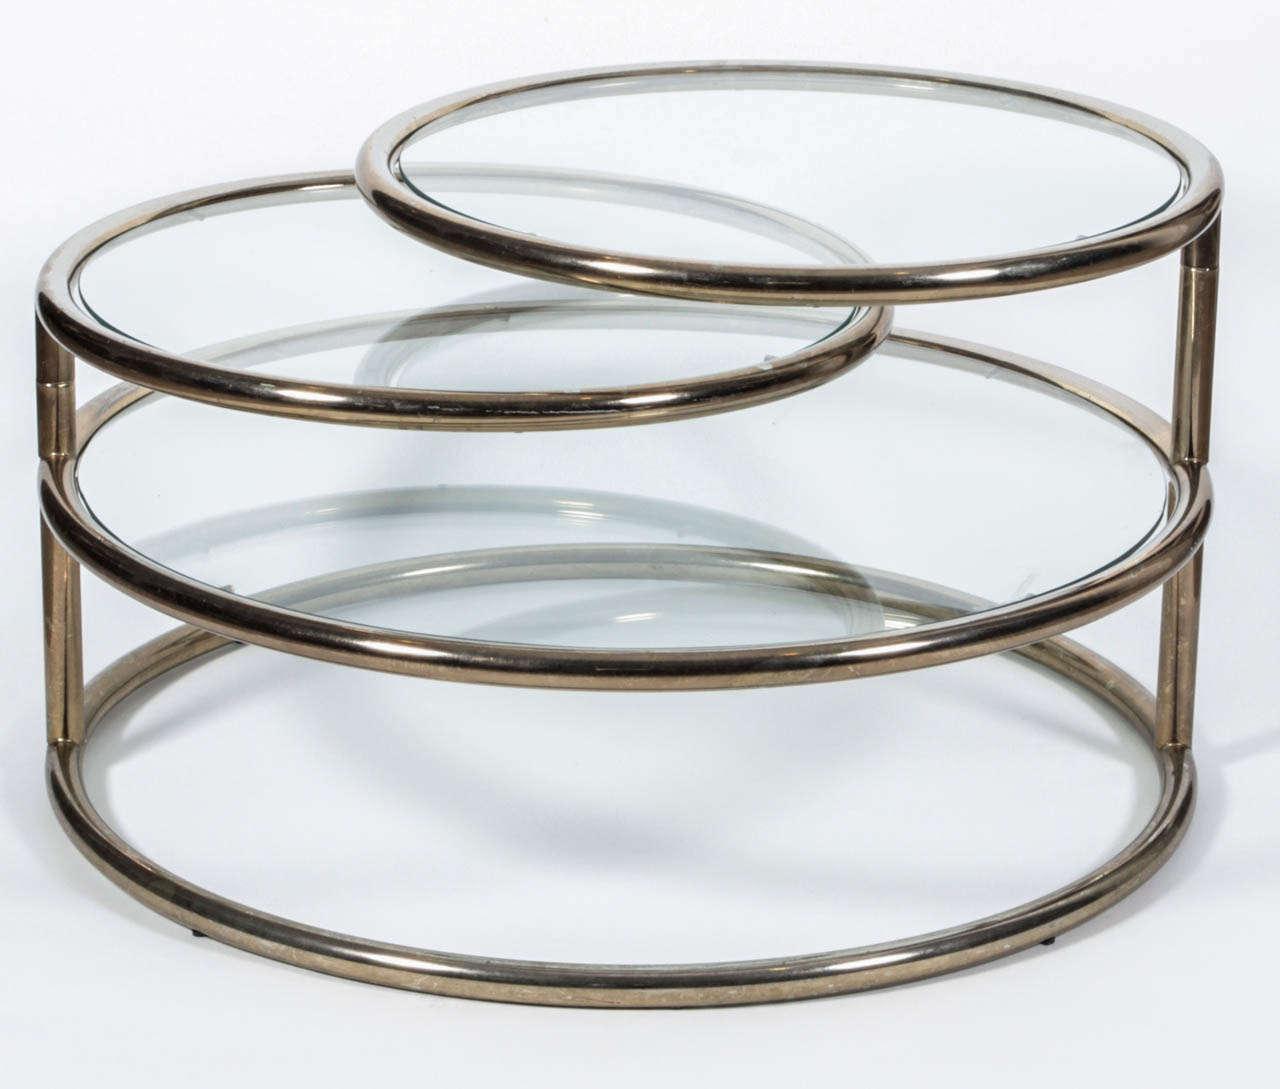 Light brass and glass circular cocktail table with three tiers.  USA, circa 1970.  Upper two tiers are adjustable. Width of table fully extended, approx. 78 inches.